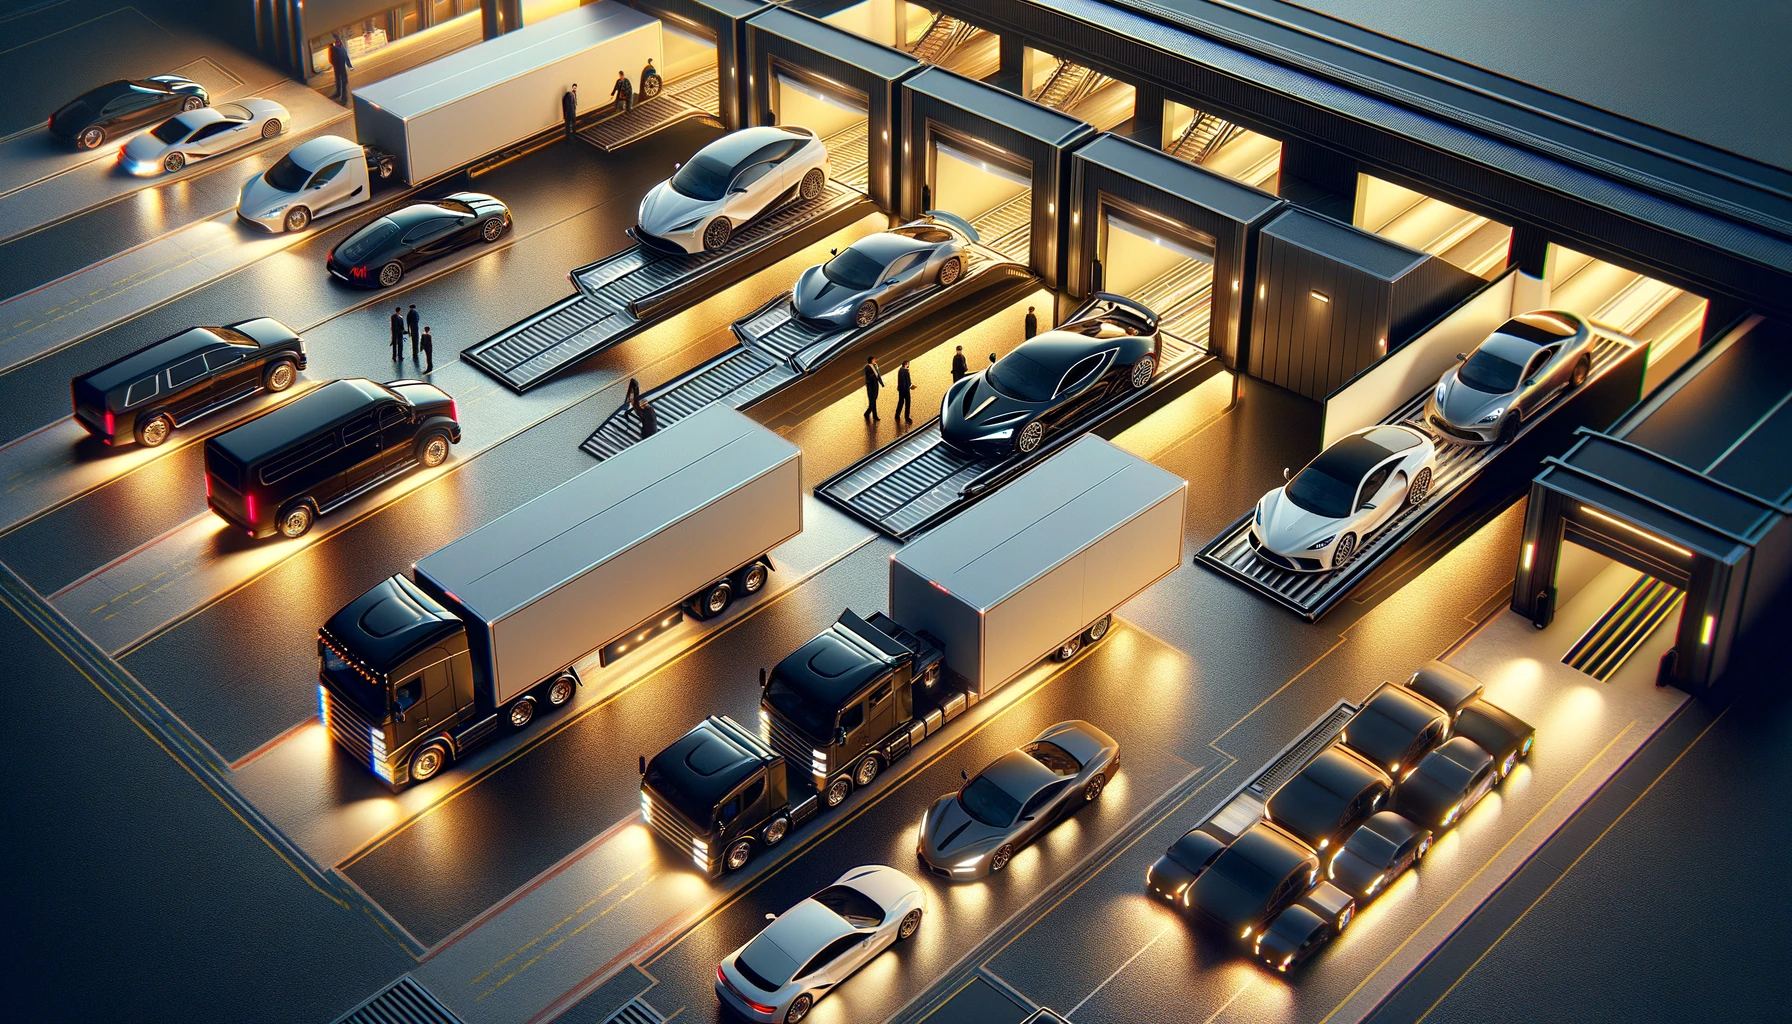 Sleek, and modern image for a car transportation brokerage website.The image depicts luxury and regular cars on hauling beds at a warehouse. - Brunson Transit, LLC